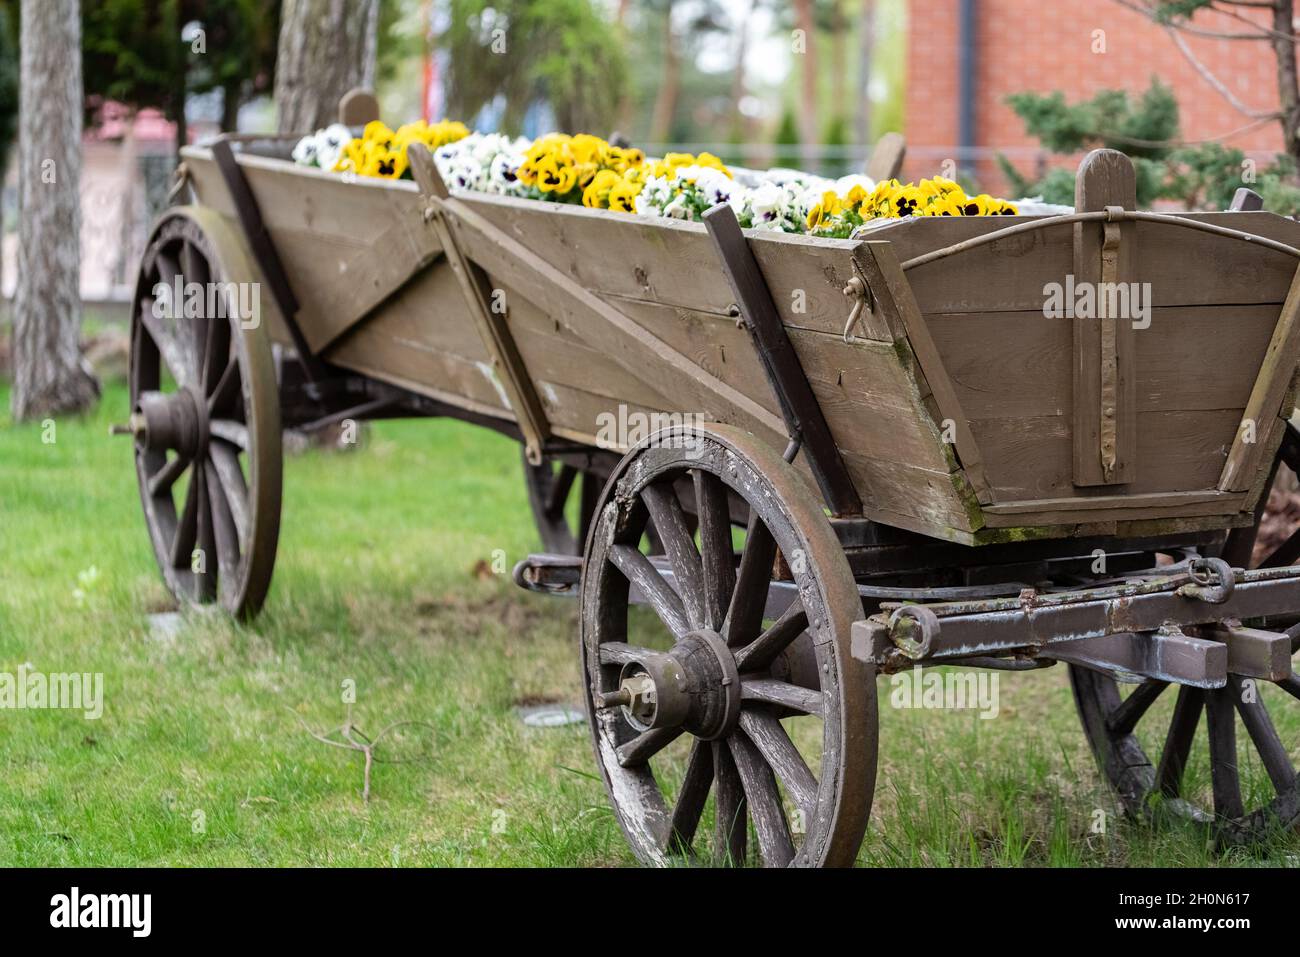 Pansies flowers, colorful plants on a wooden old cart. Lots of colorful flowers next to each other. Display of pansies. Stock Photo